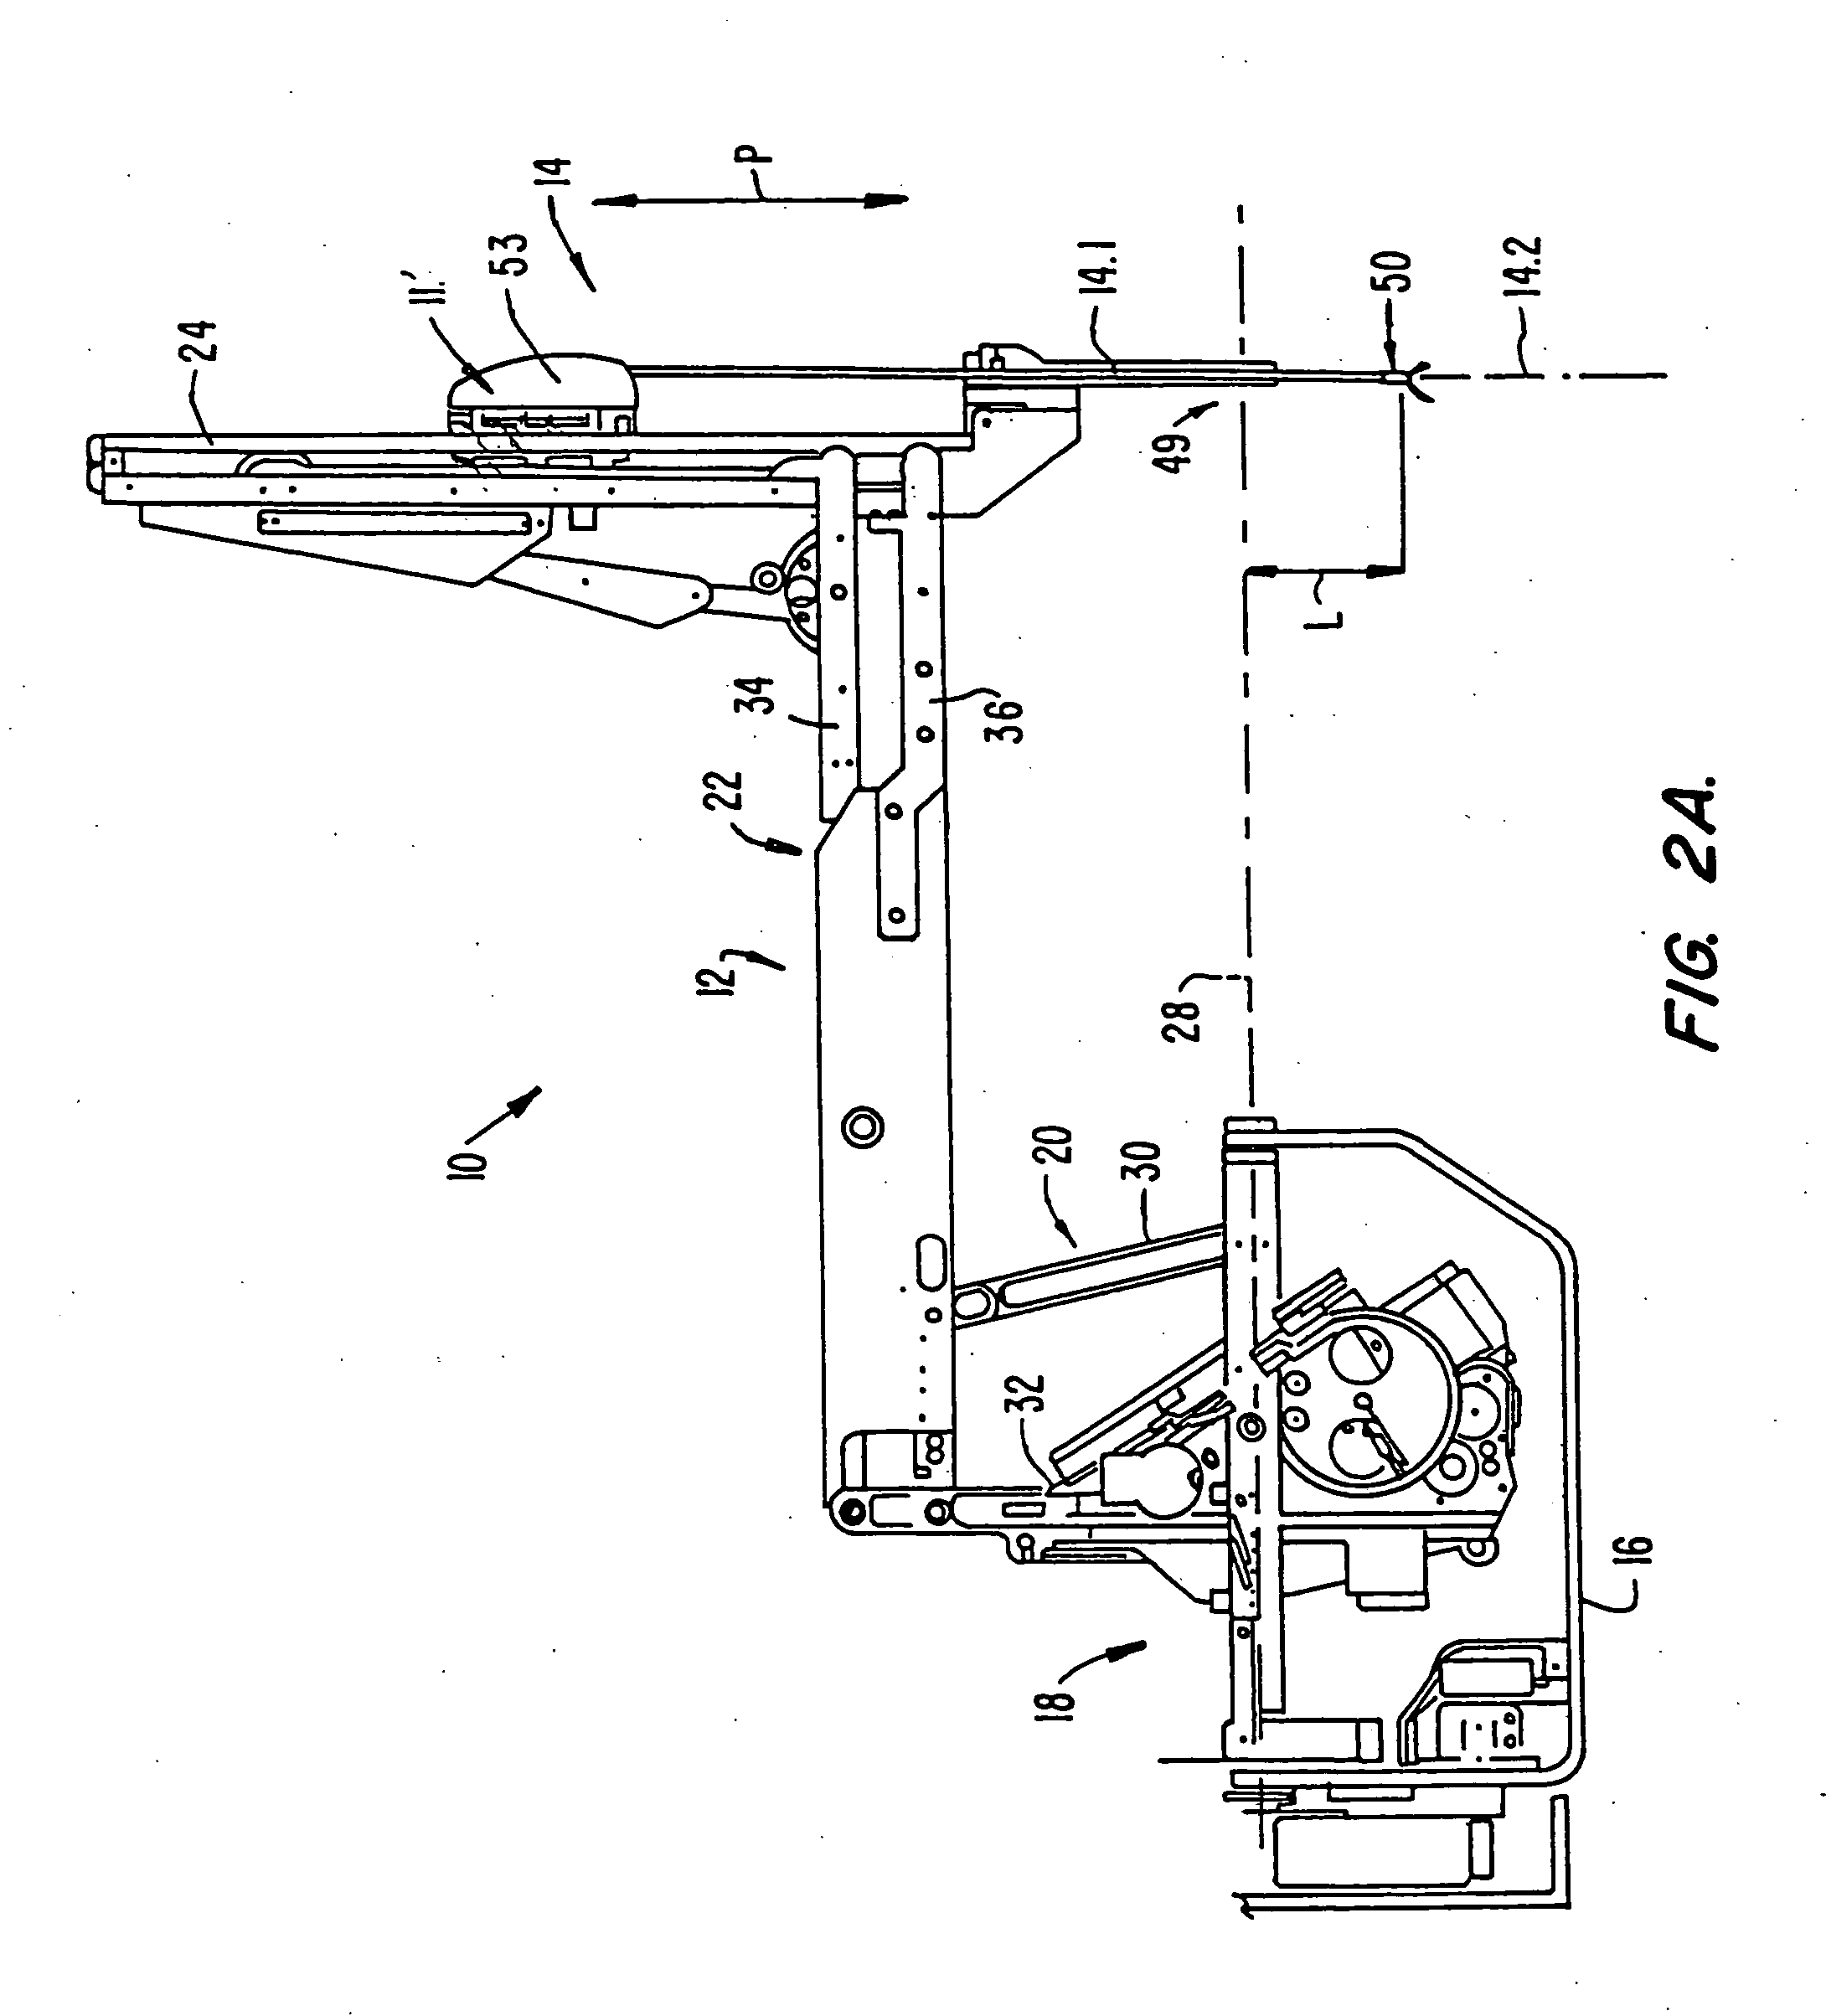 Camera referenced control in a minimally invasive surgical apparatus